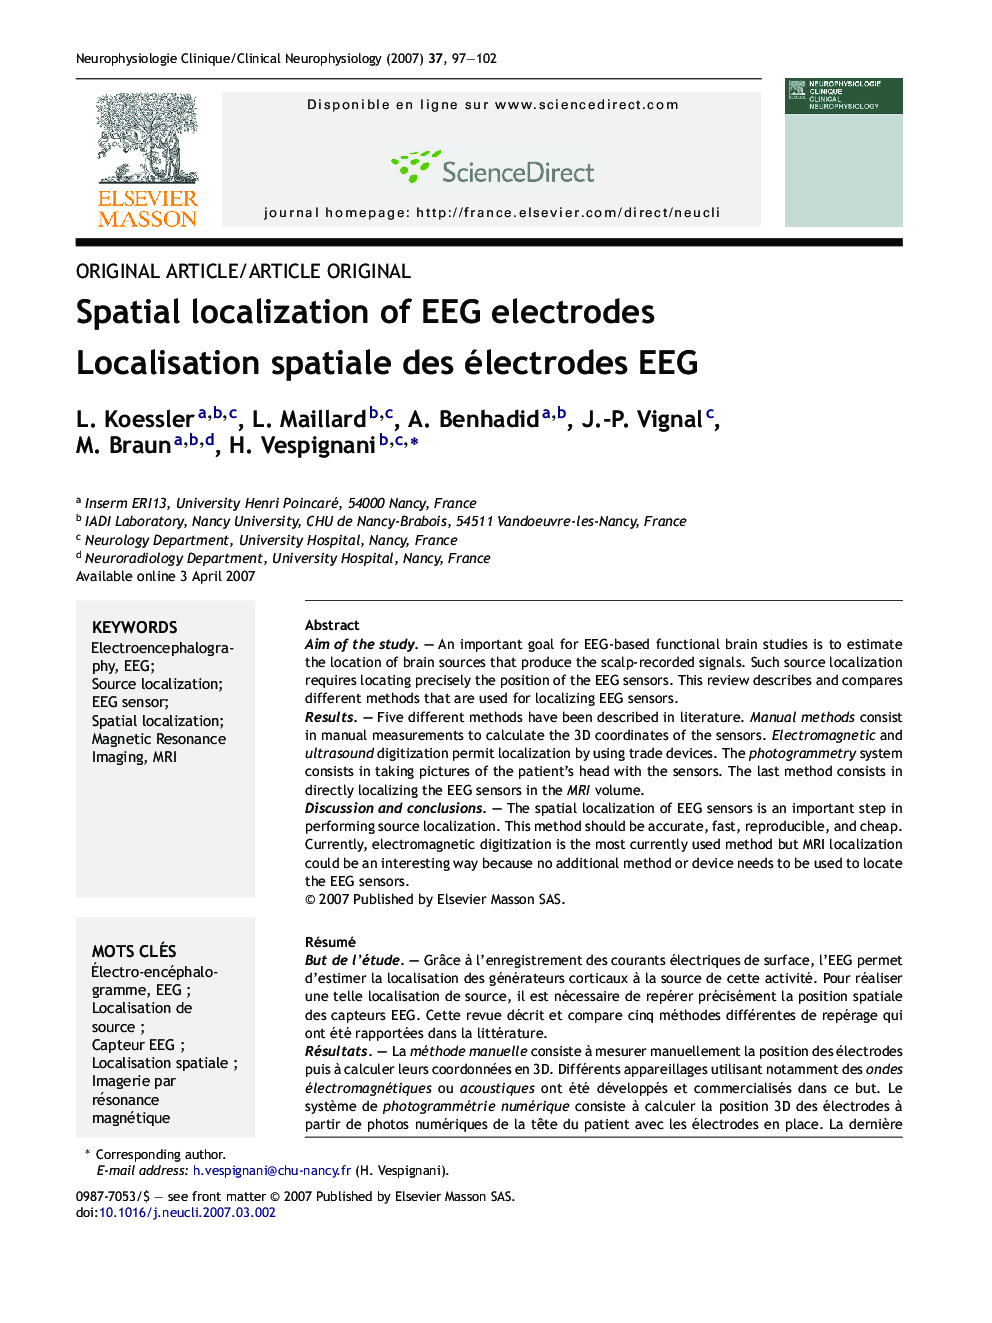 Spatial localization of EEG electrodes